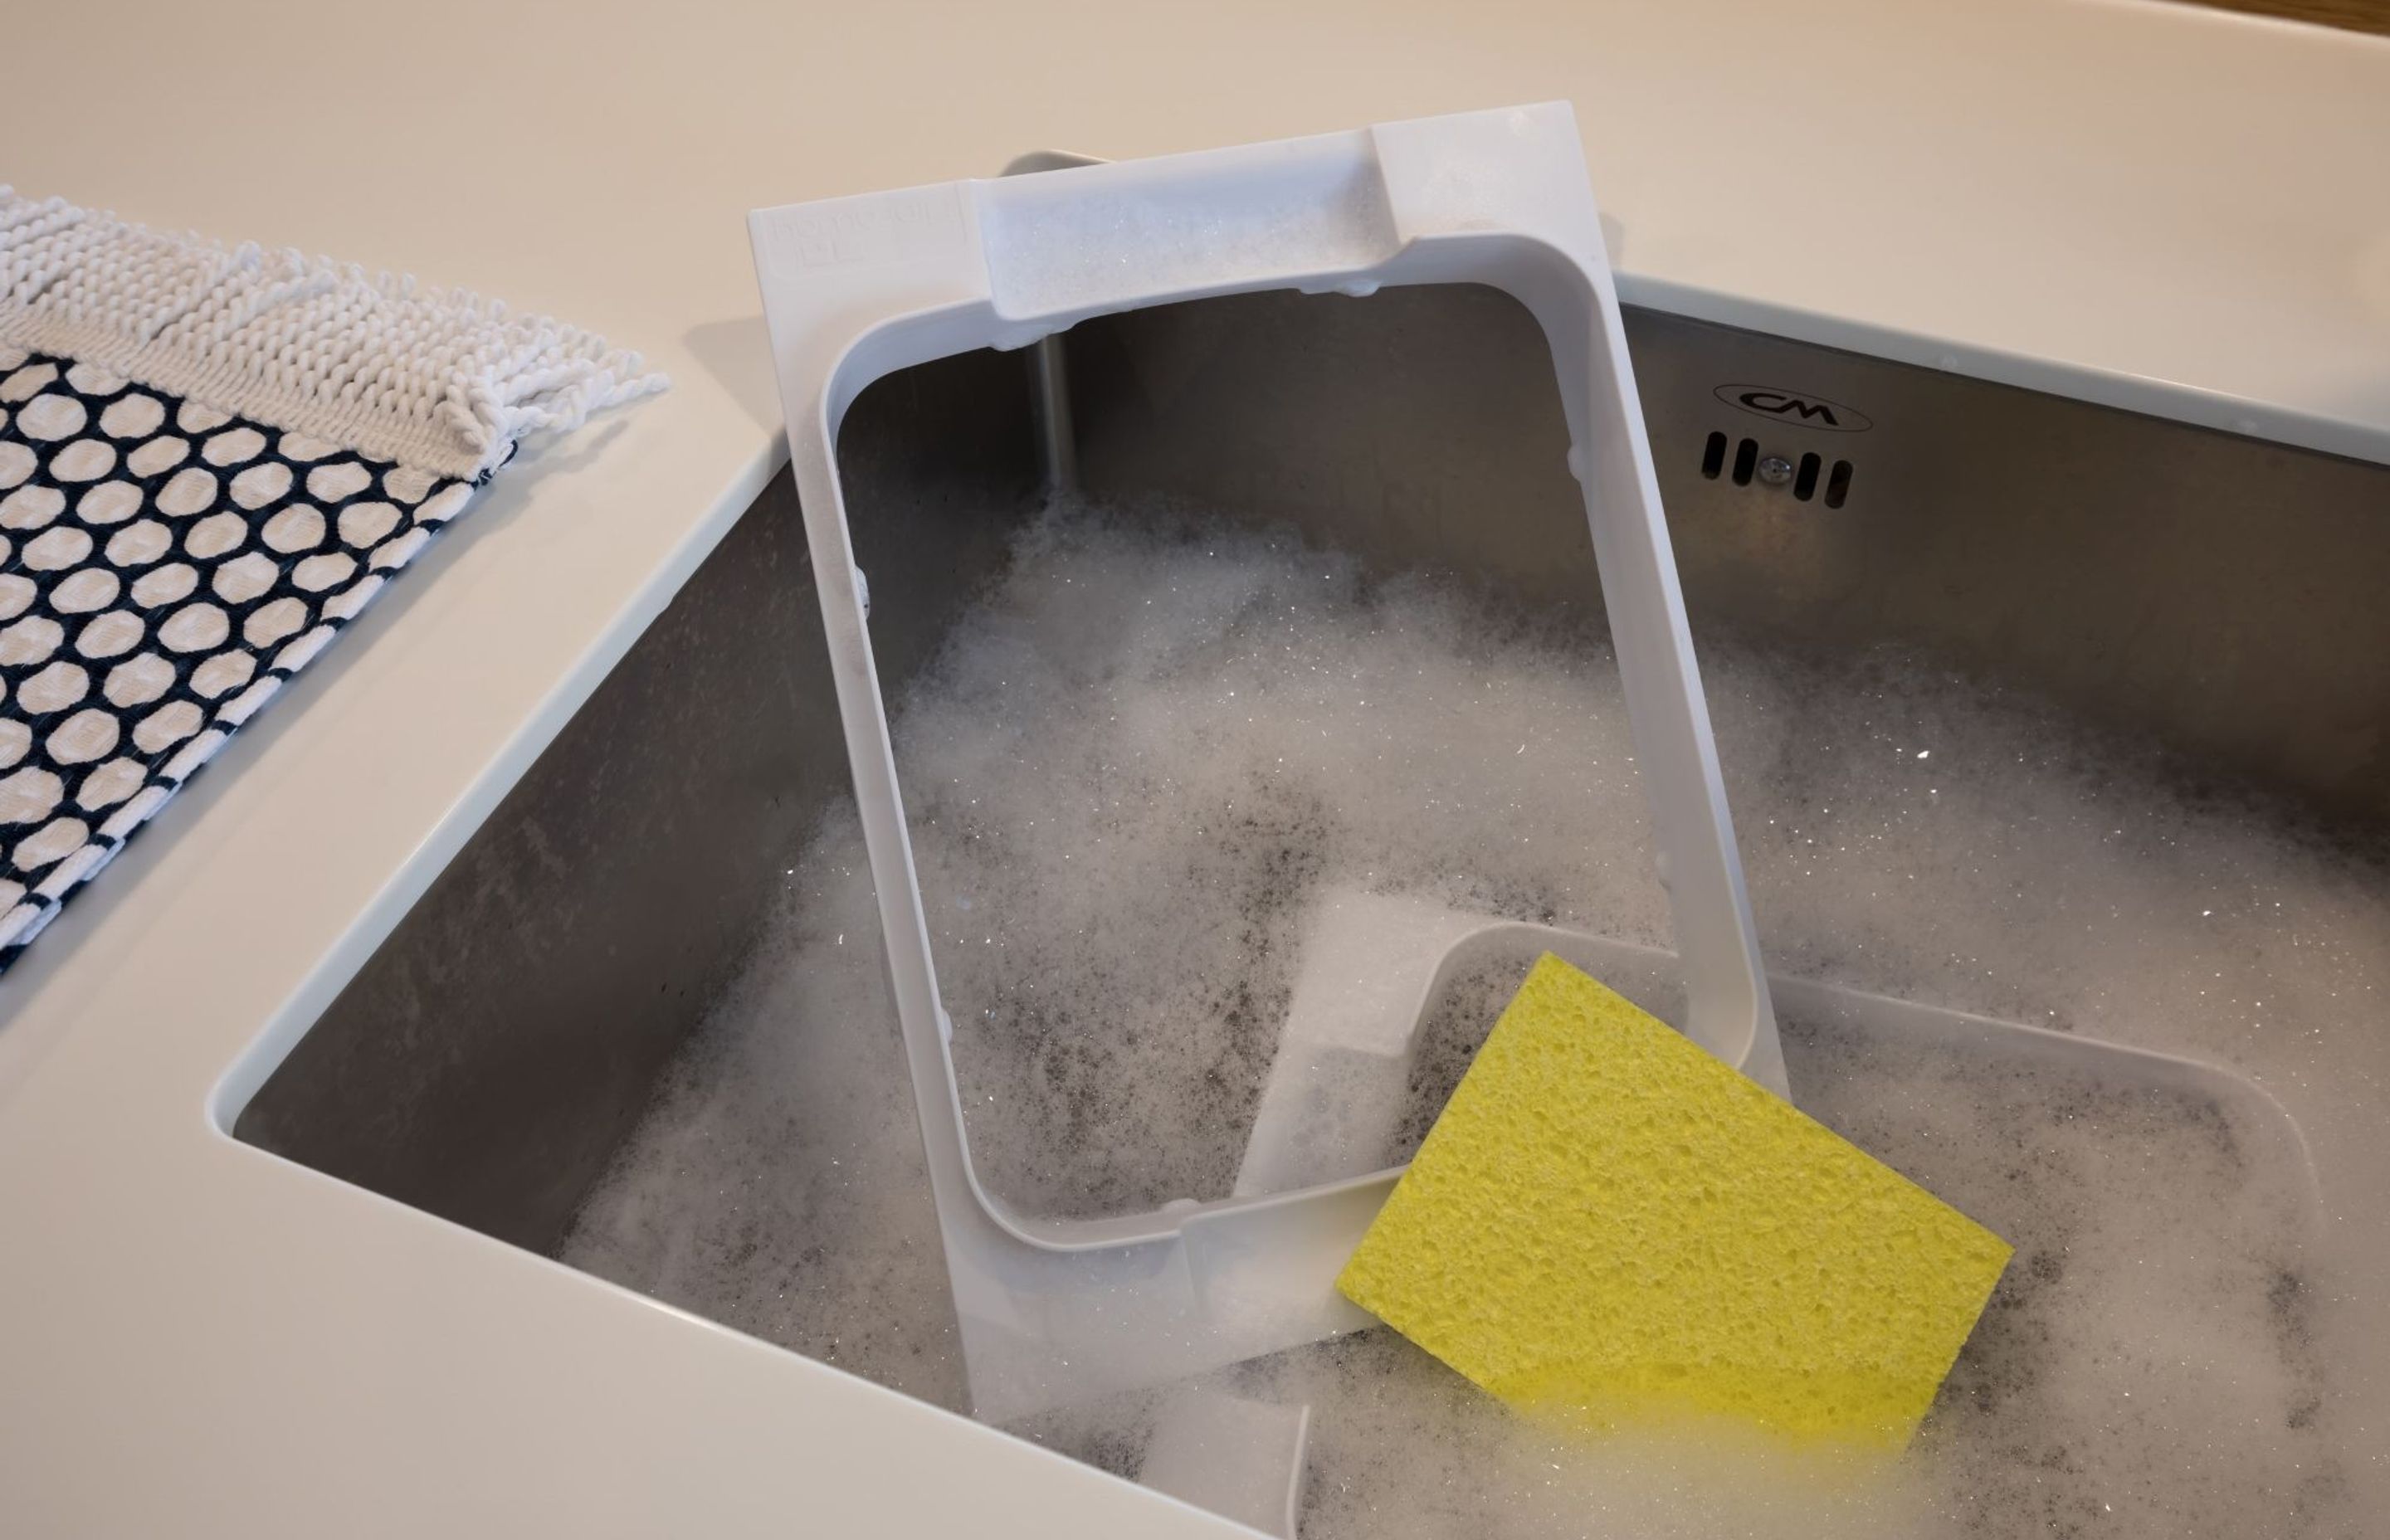 Concelo features "Clip'N'Clean" trays that can be easily removed for cleaning in warm soapy water.